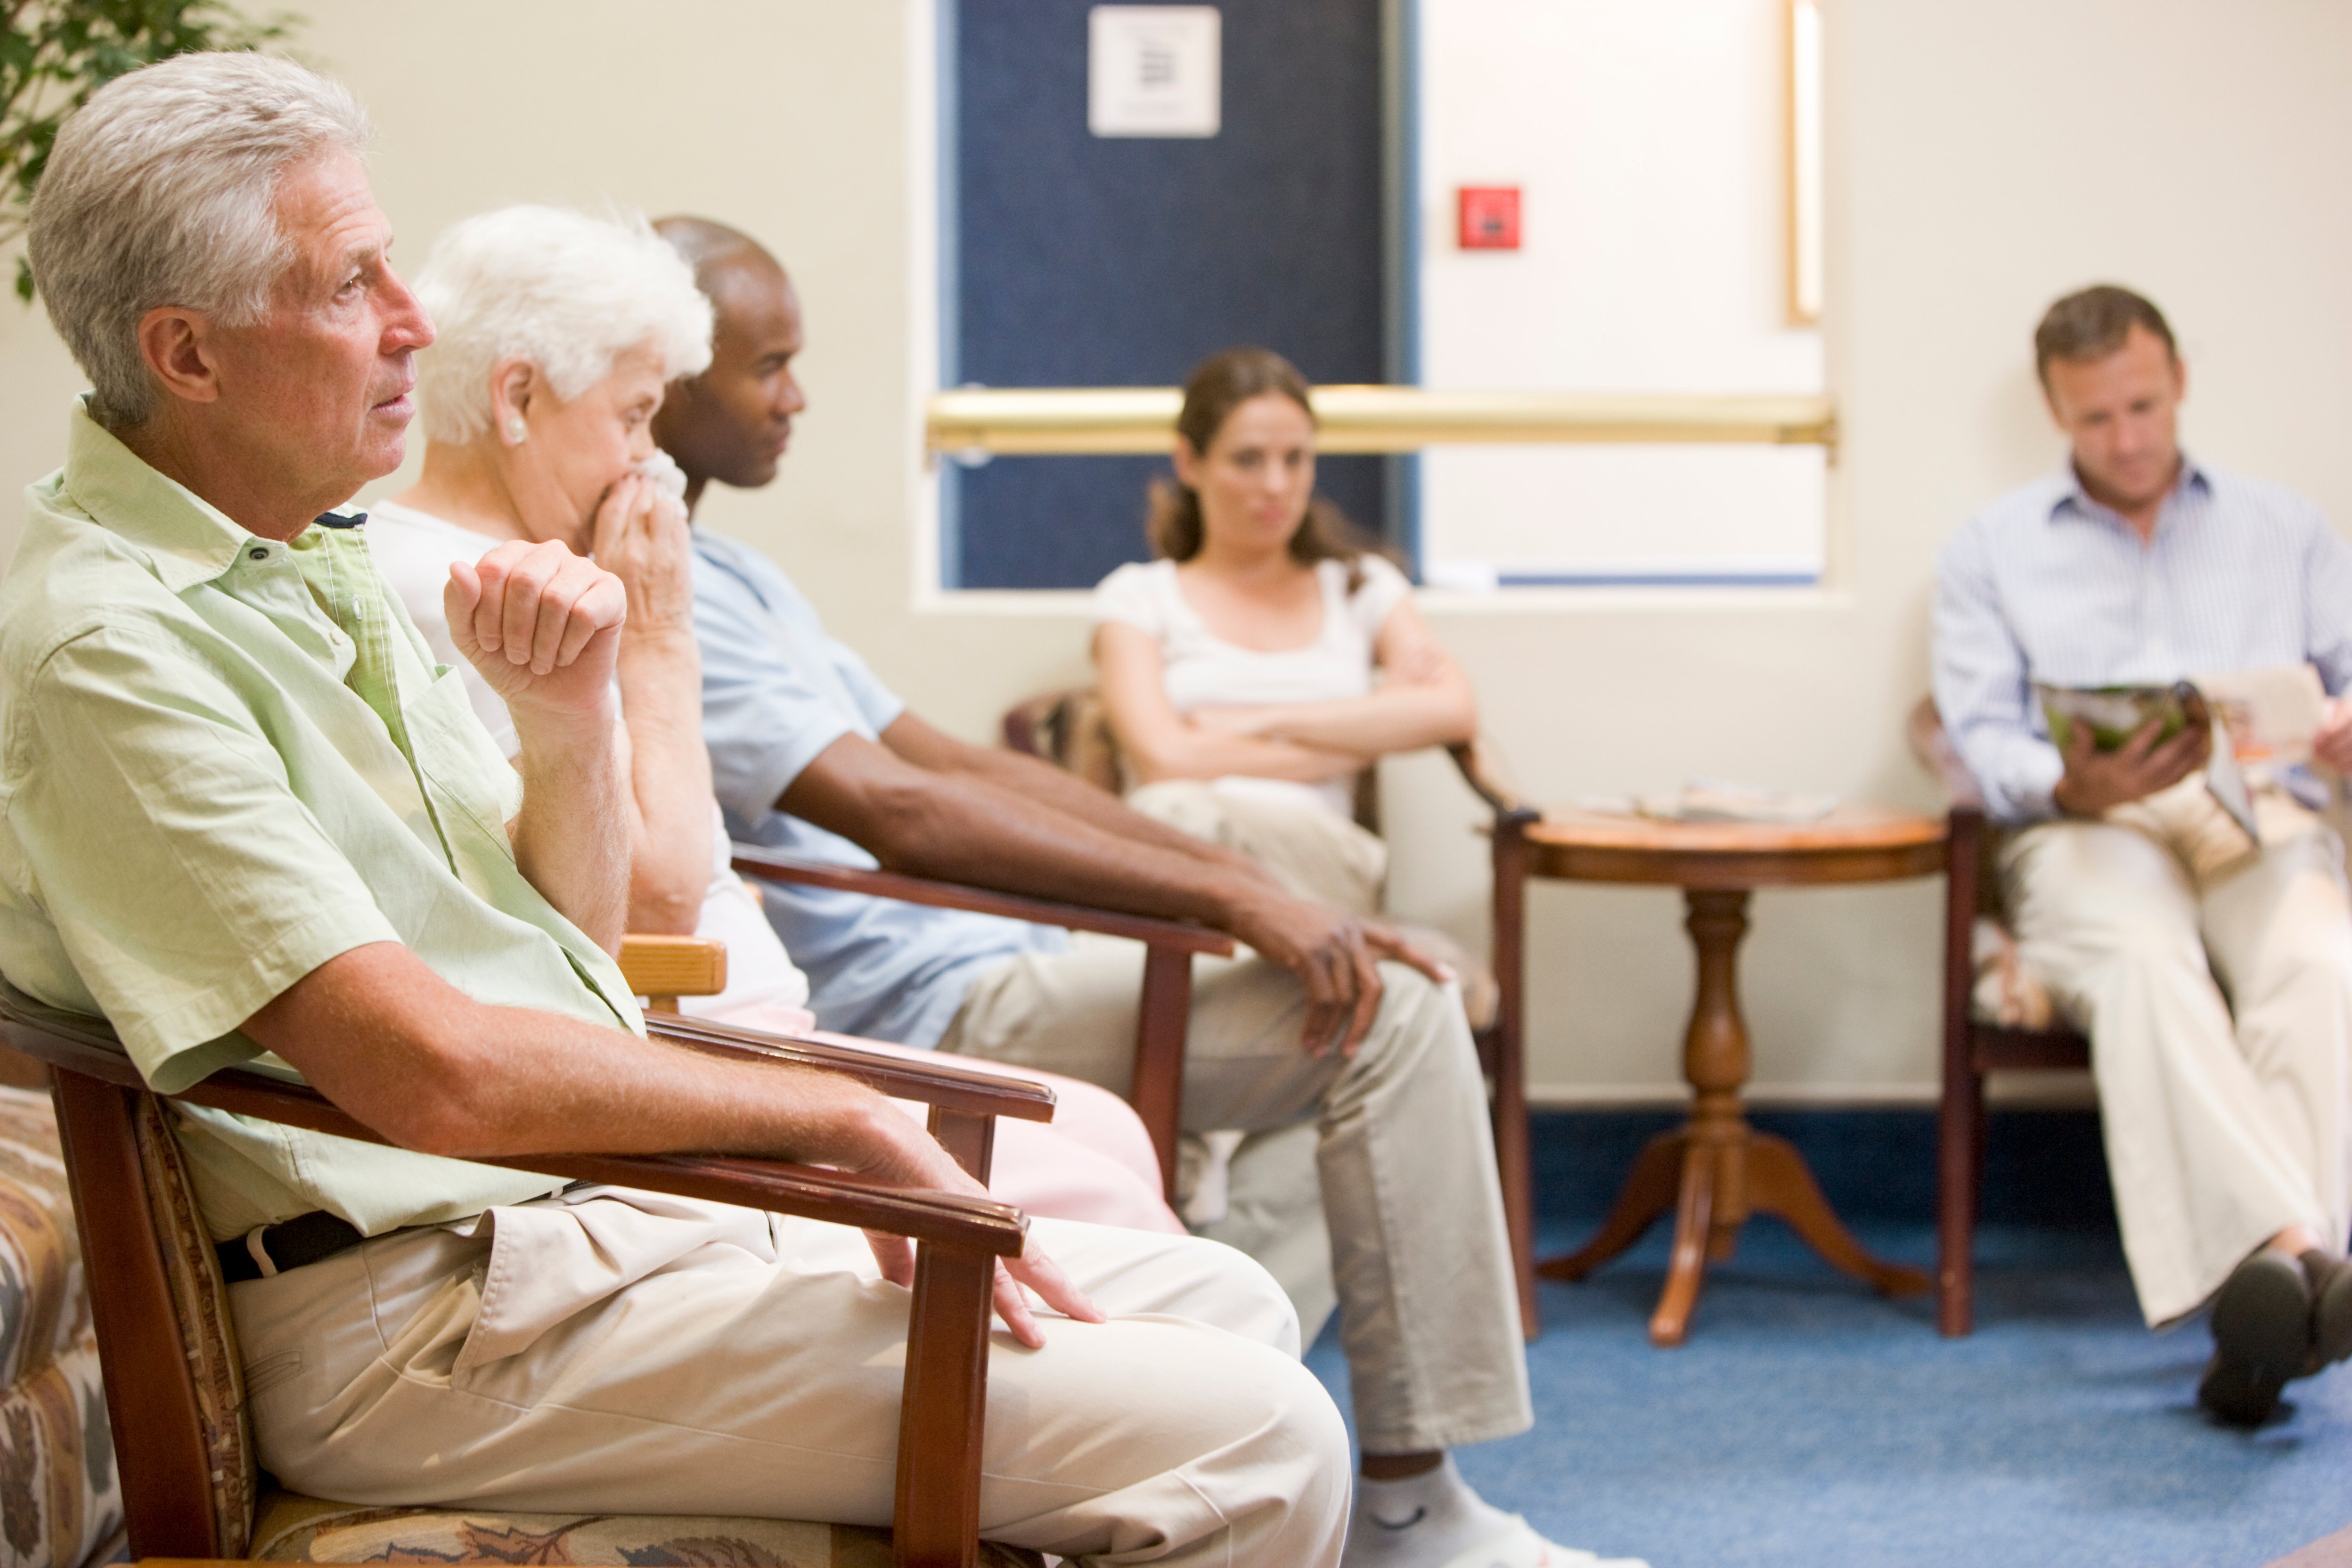 5 patients in clinic waiting room